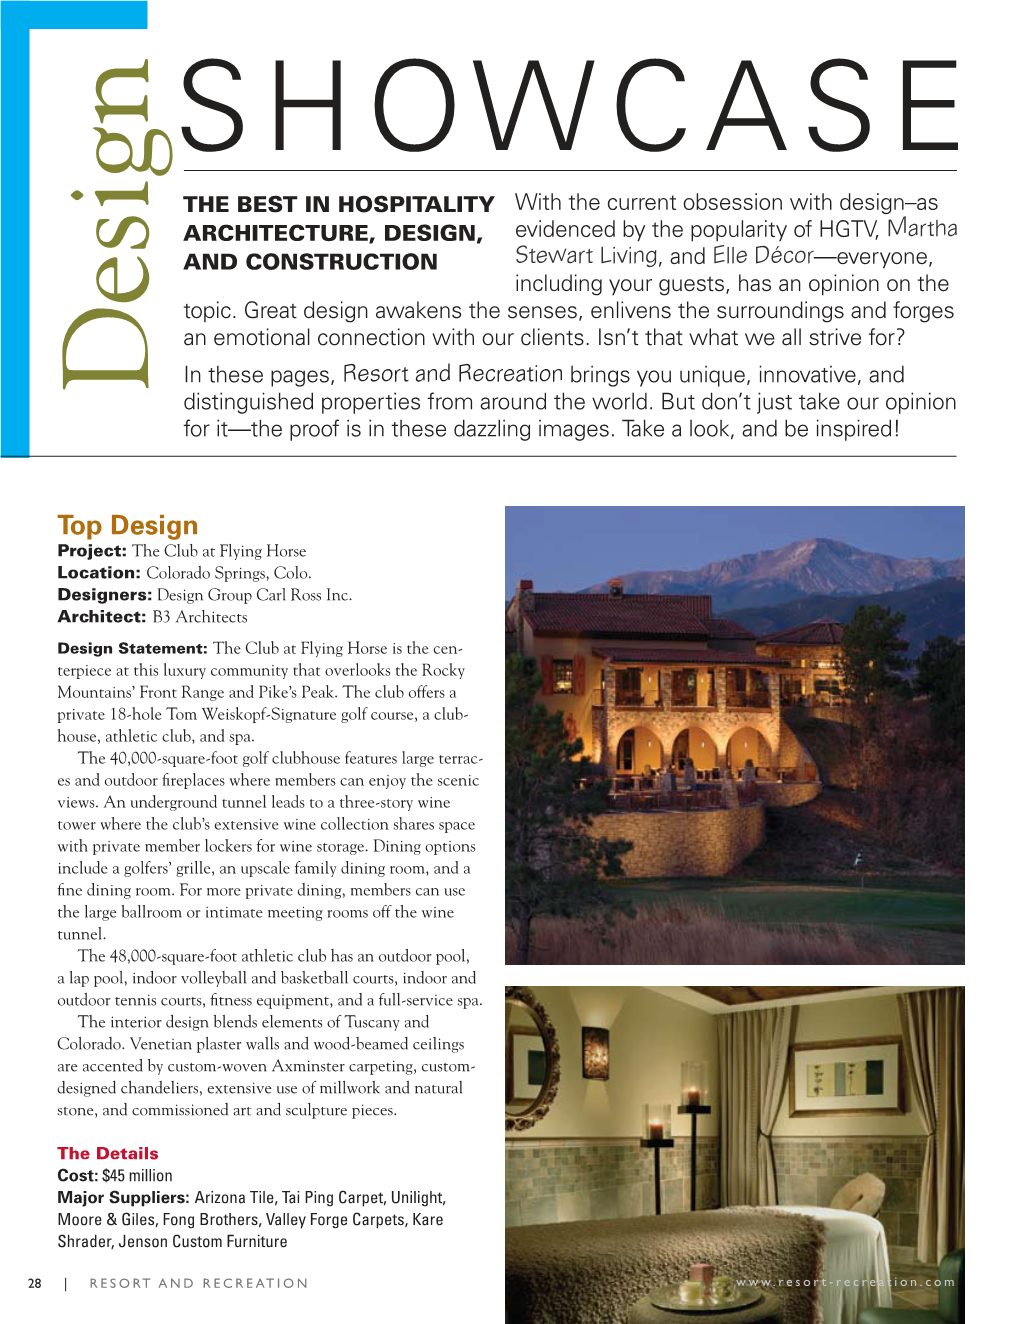 Top Design Project: the Club at Flying Horse Location: Colorado Springs, Colo